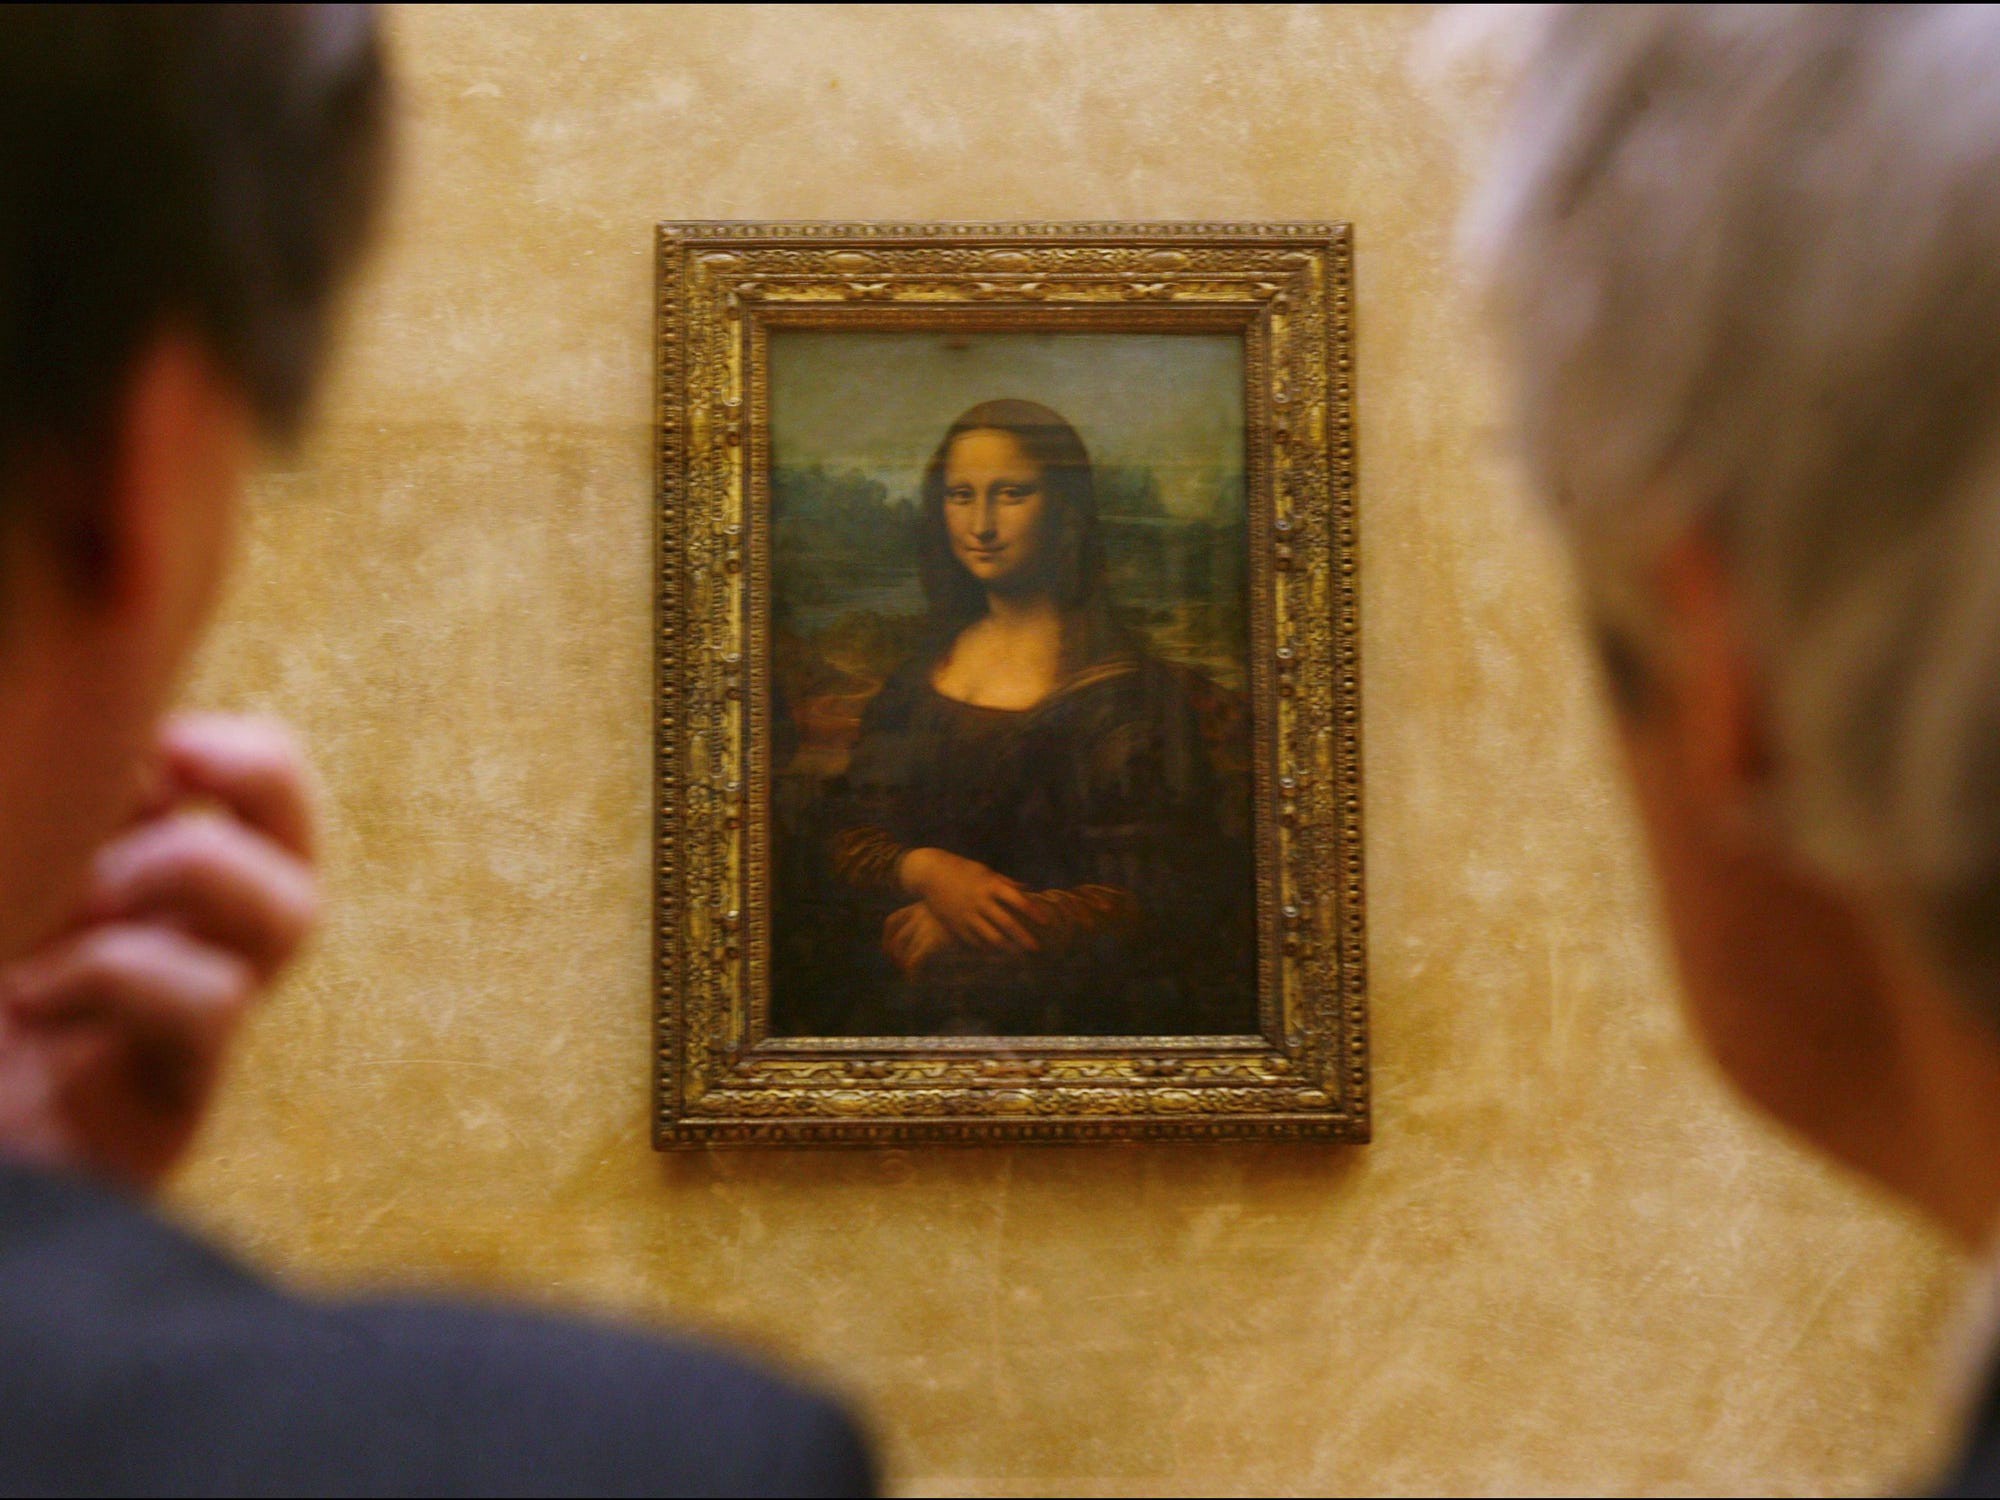 A new Netflix documentary explores the world’s biggest art heist — here are 11 times famous artwork was stolen and recovered